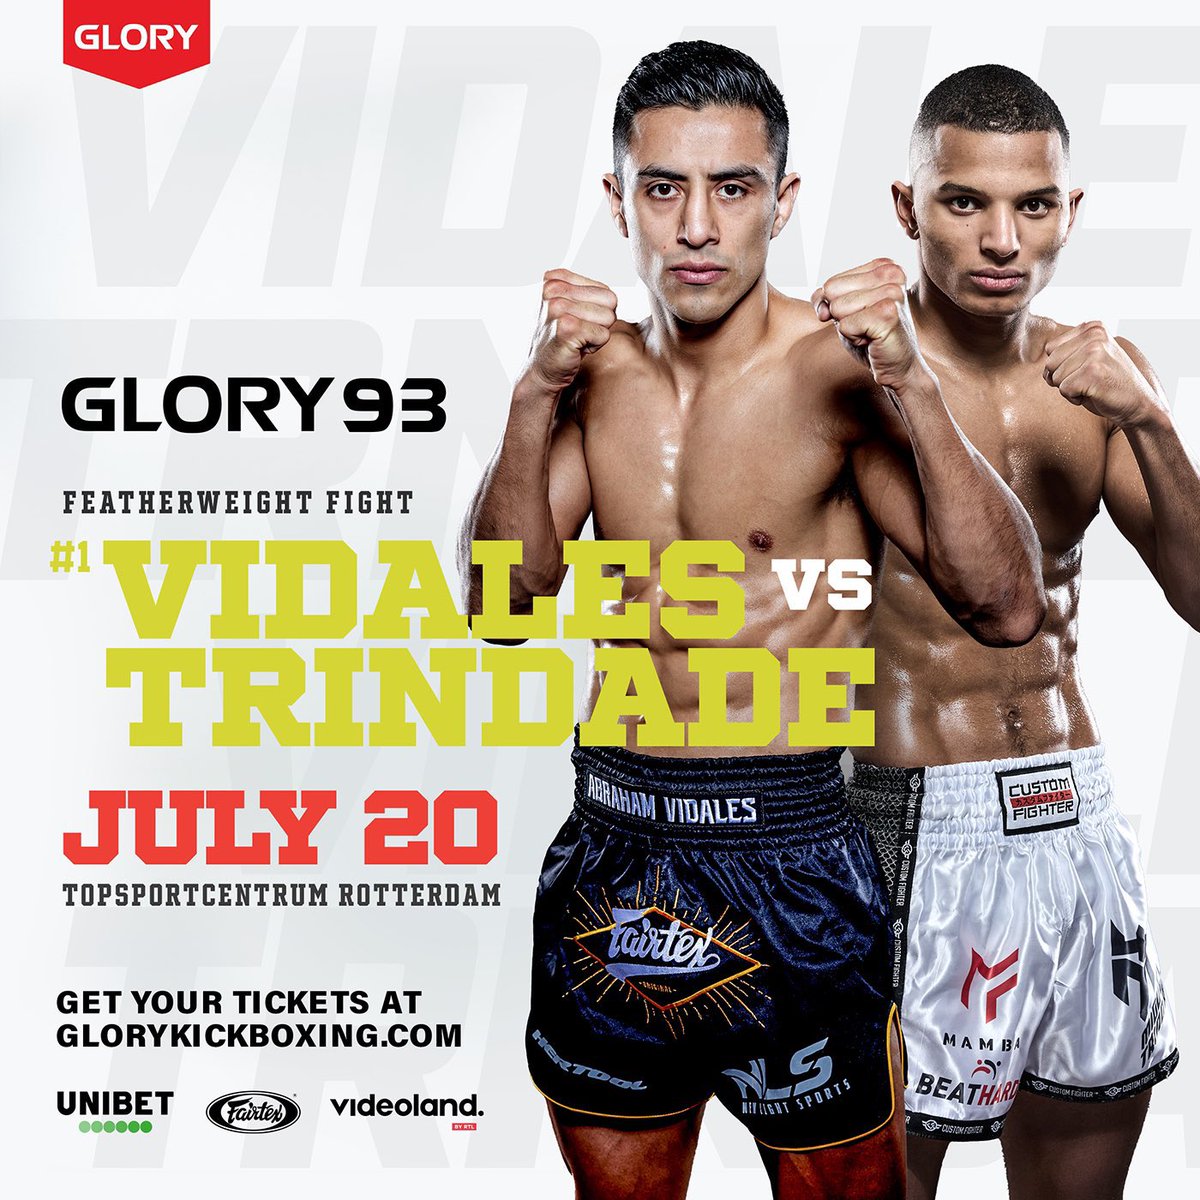 Abraham Vidales vs. Miguel Trindade is set to fight #GLORY93 on July 20th. (via @GLORY_WS)